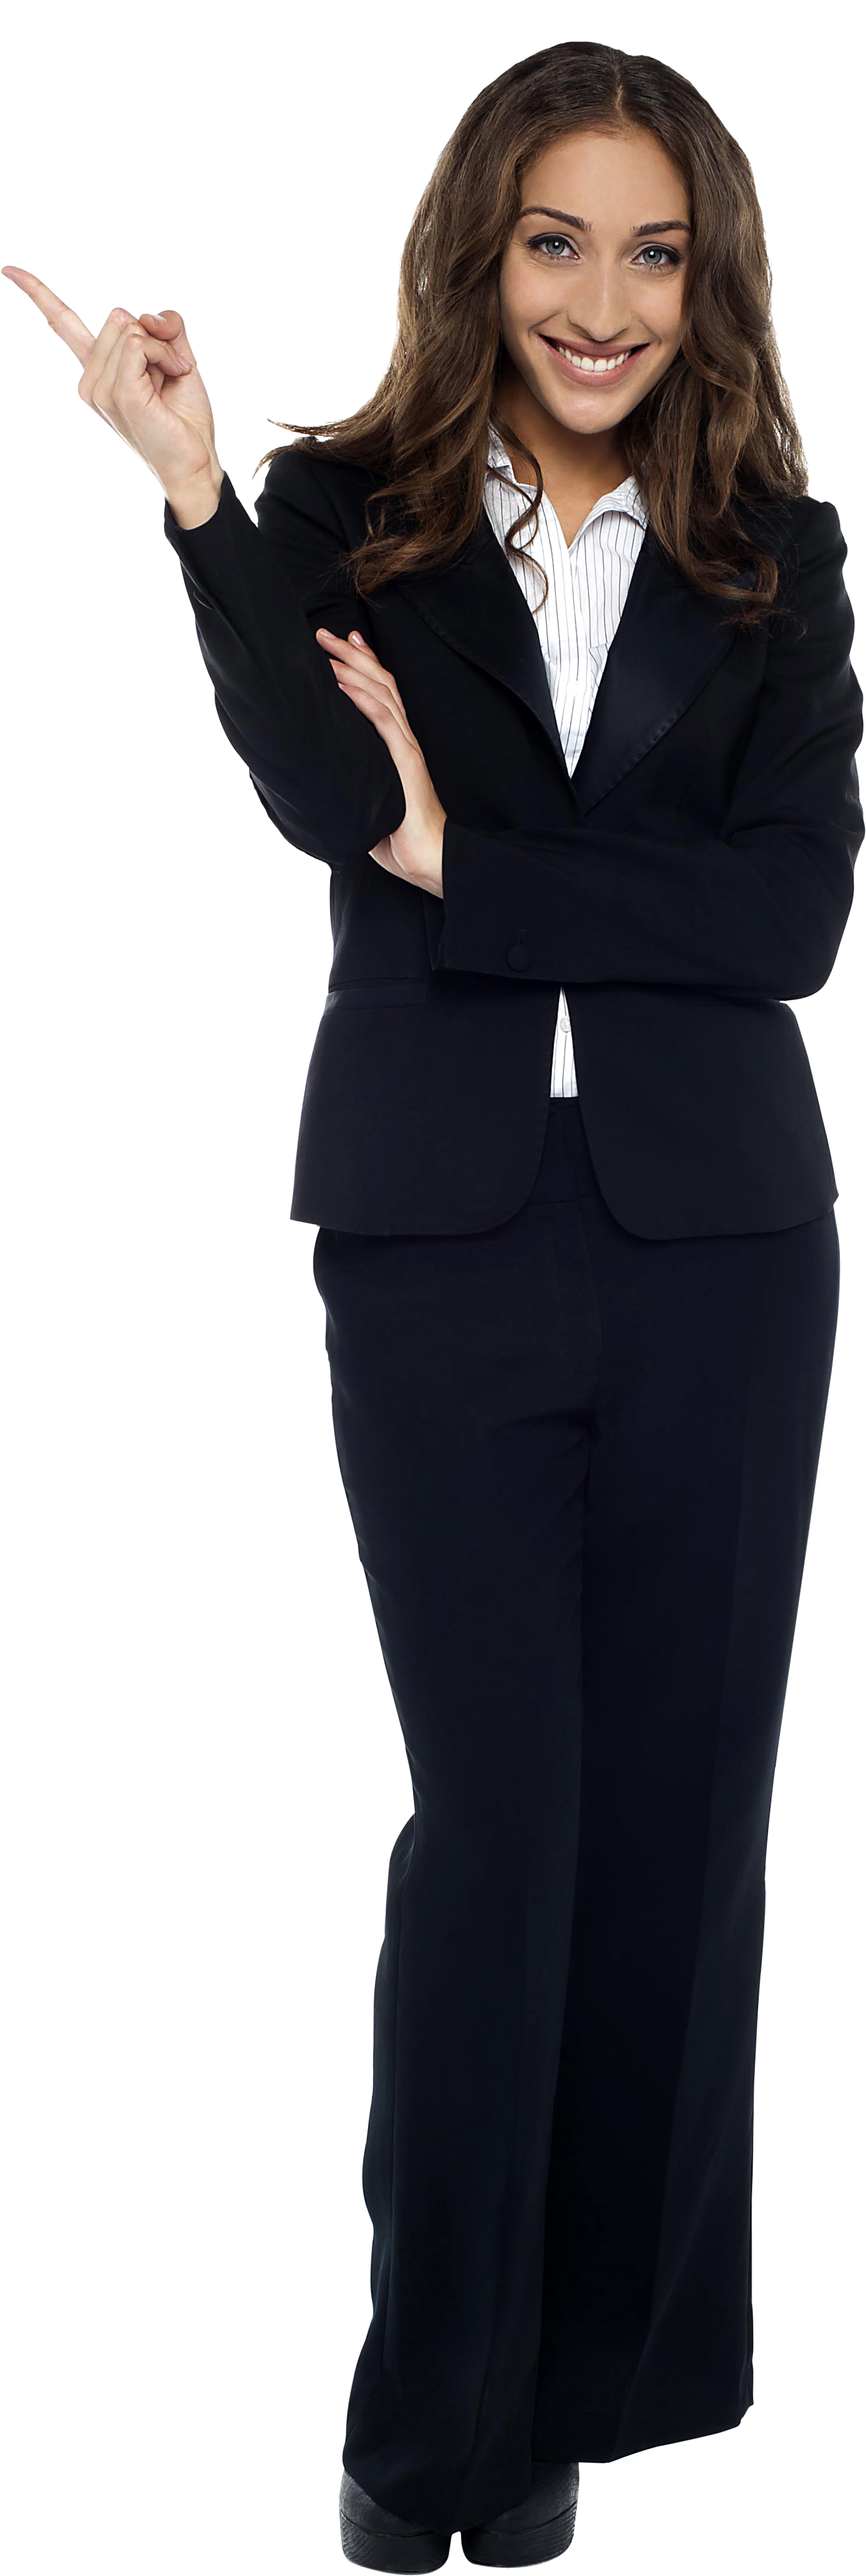 A Woman In A Suit